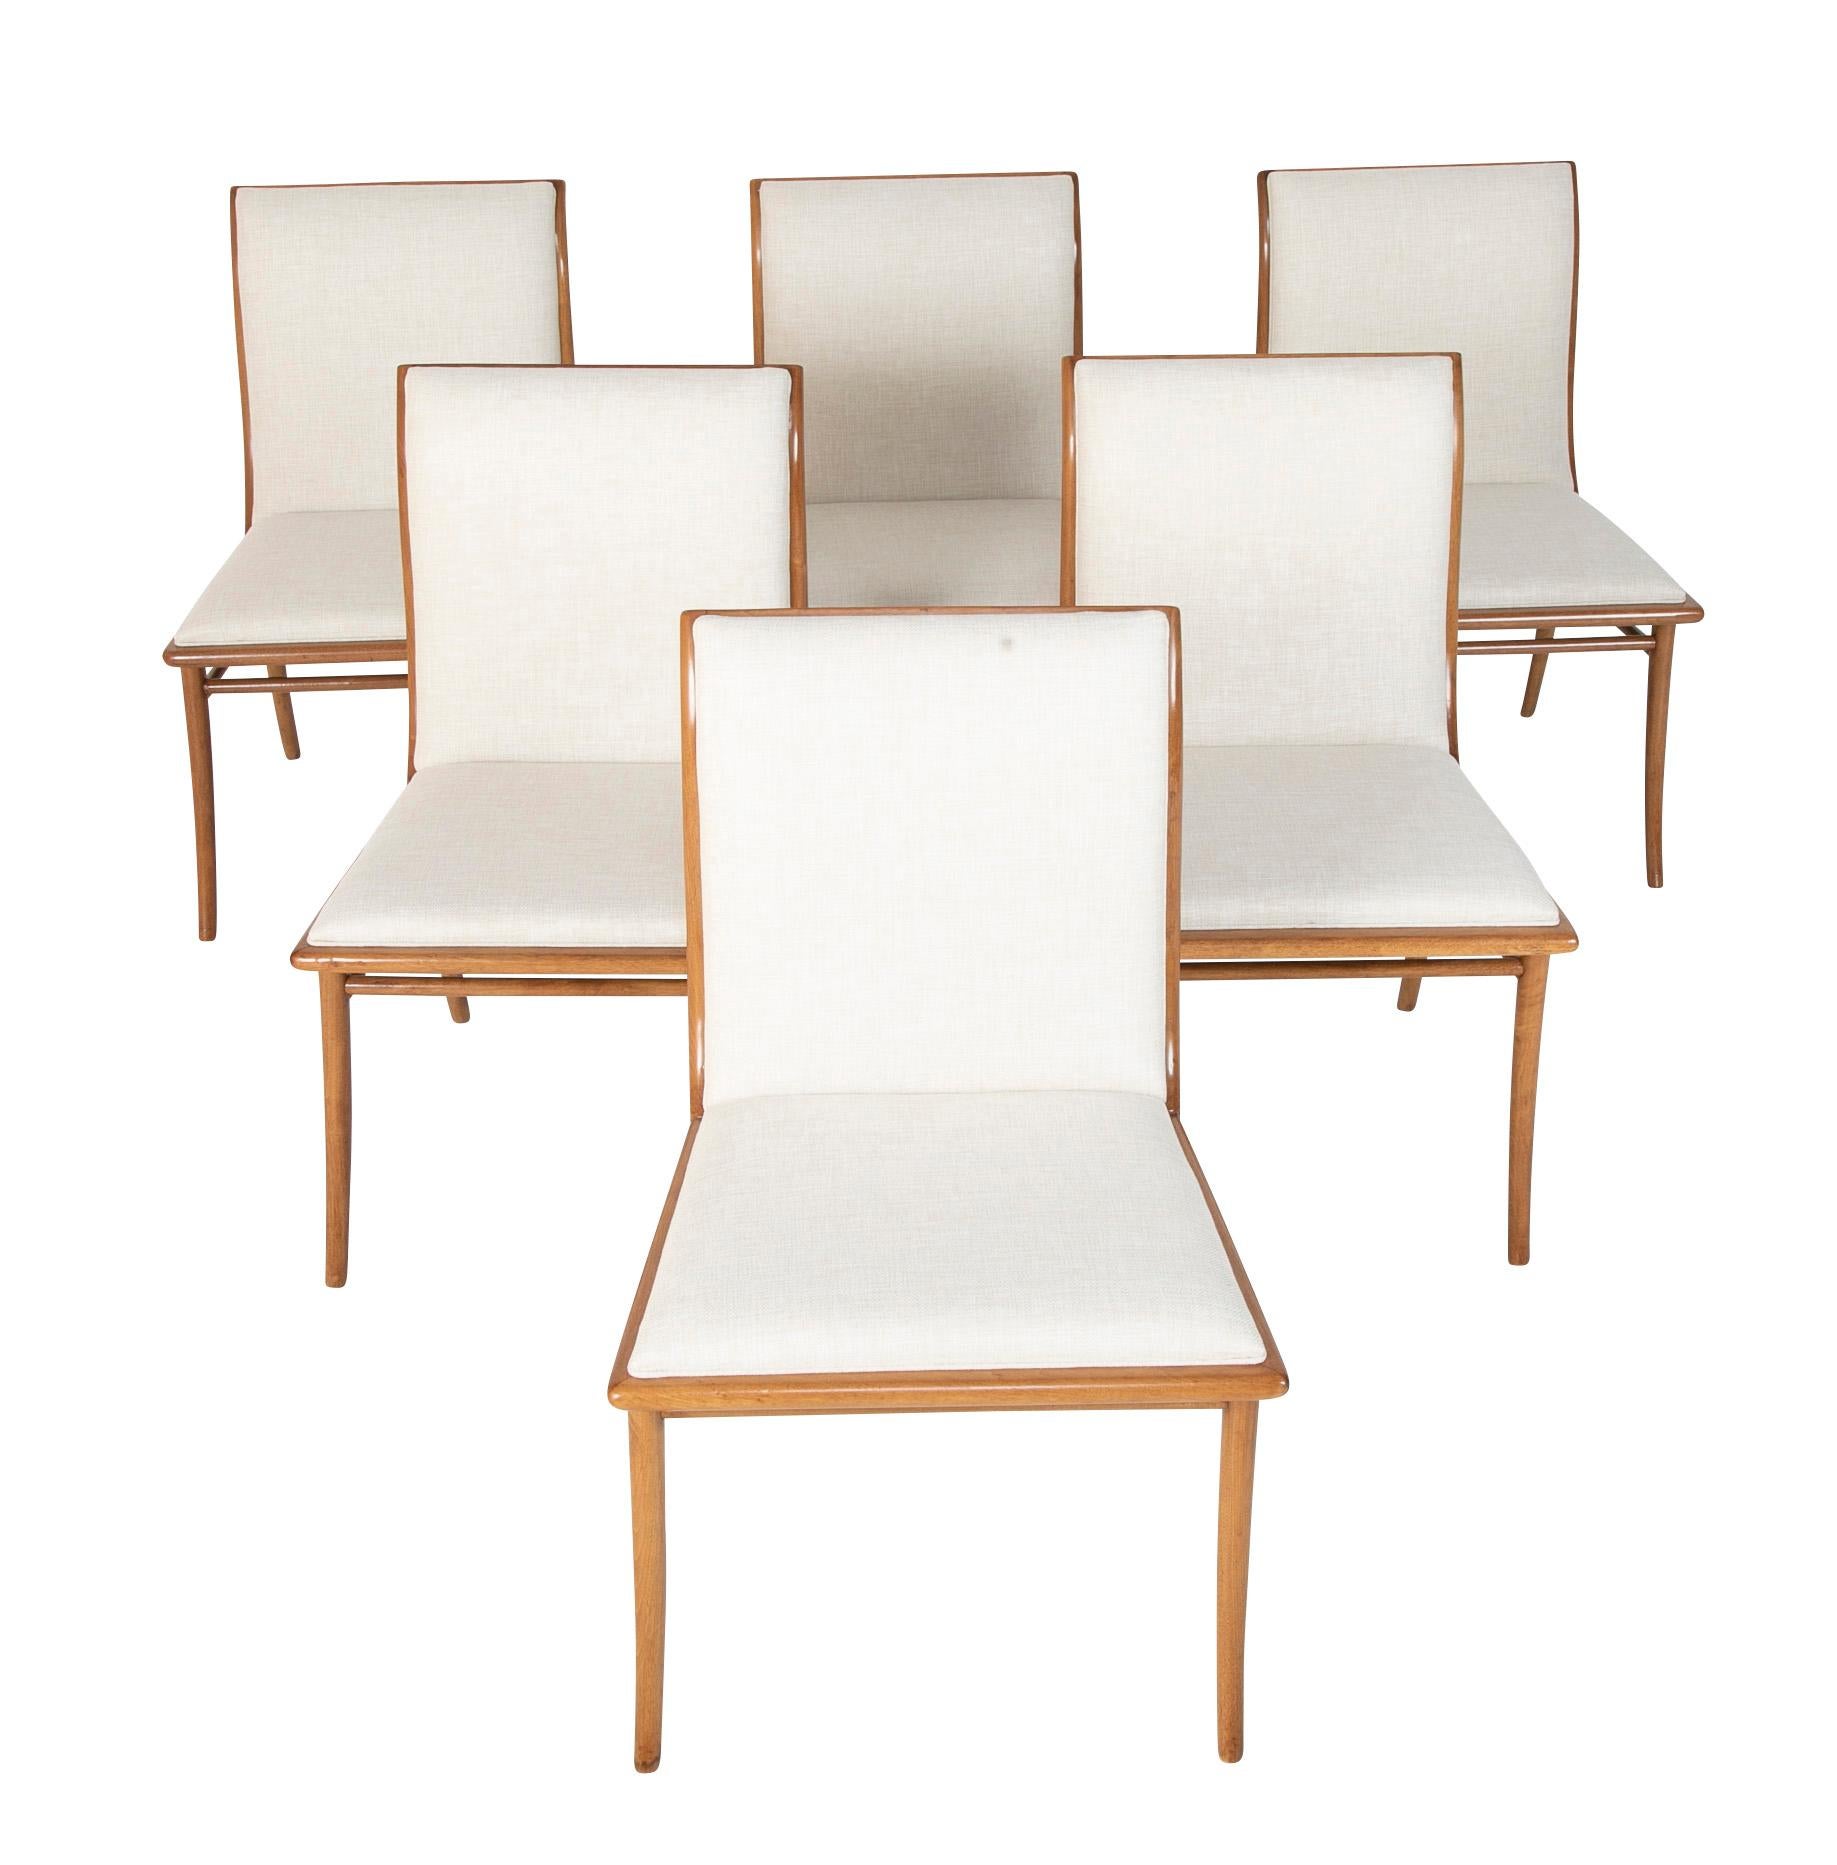 A wonderful set of six bleached mahogany dining chairs by T. H Robsjohn-Gibbings.